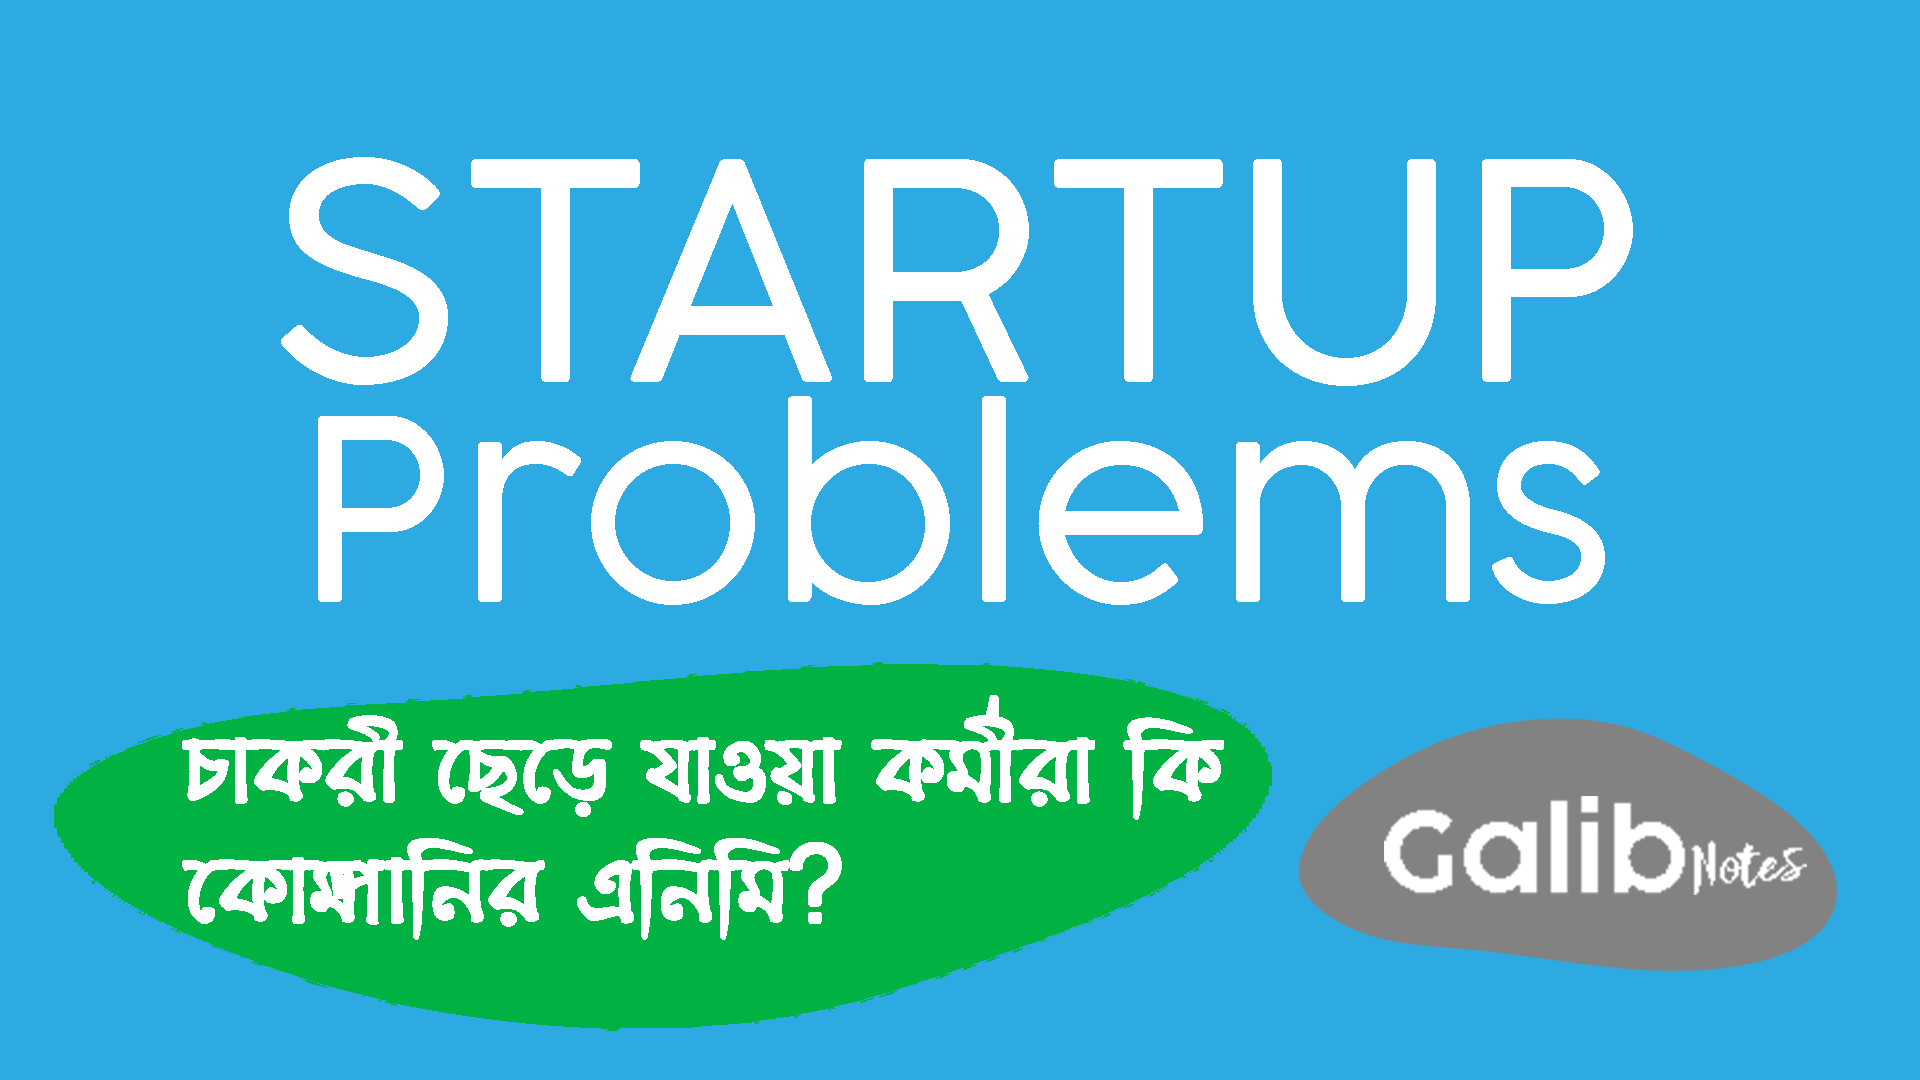 Best start up in bangladesh and Its problem